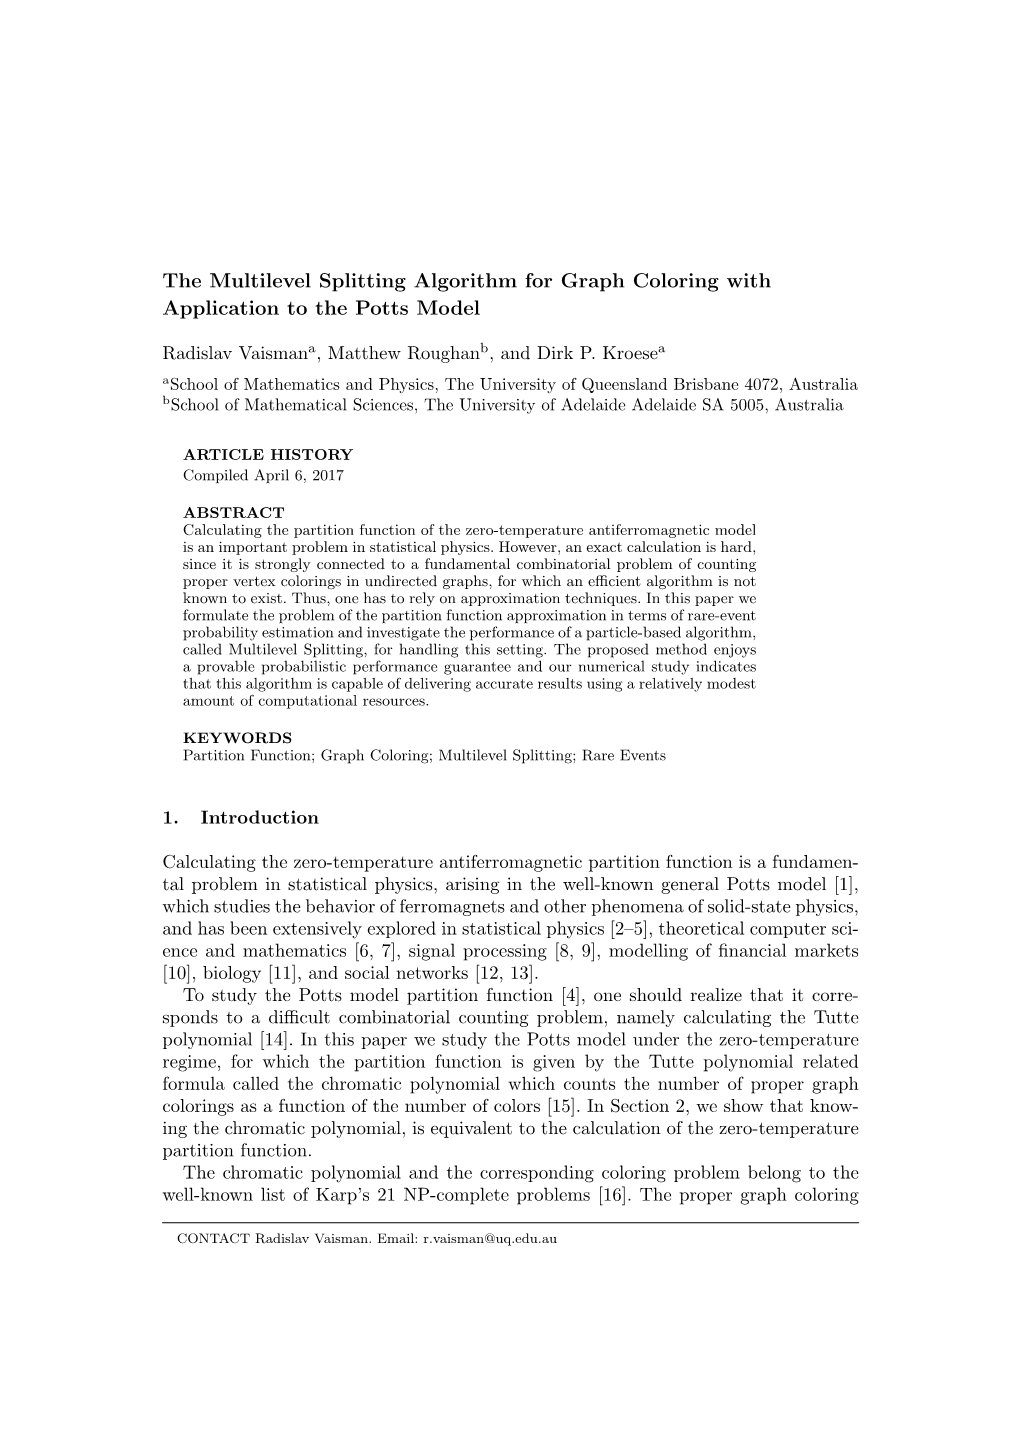 The Multilevel Splitting Algorithm for Graph Coloring with Application to the Potts Model